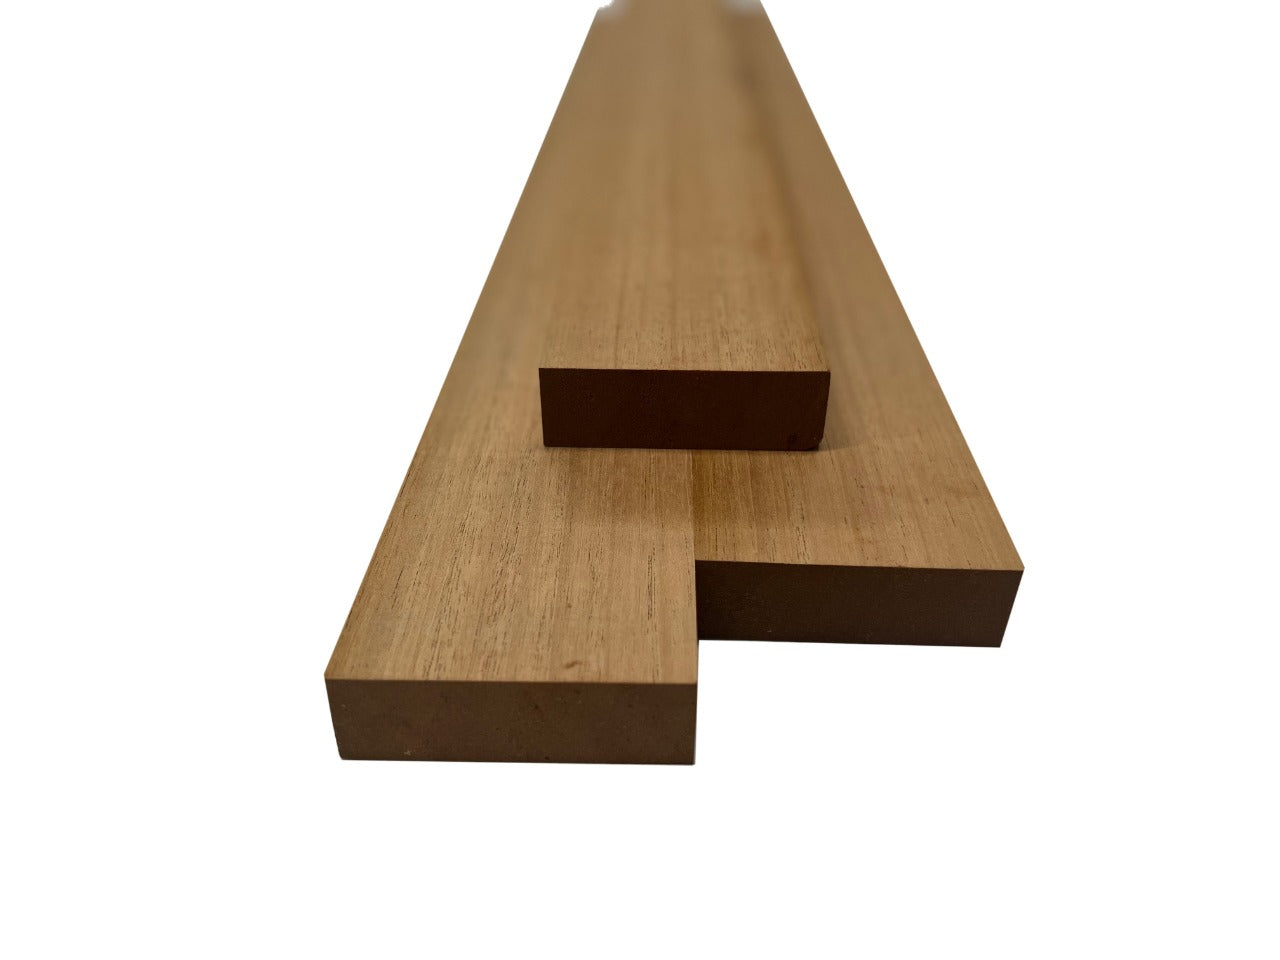 Pack of 3, AAA Guitar Neck Blanks - Exotic Wood Zone - Buy online Across USA 